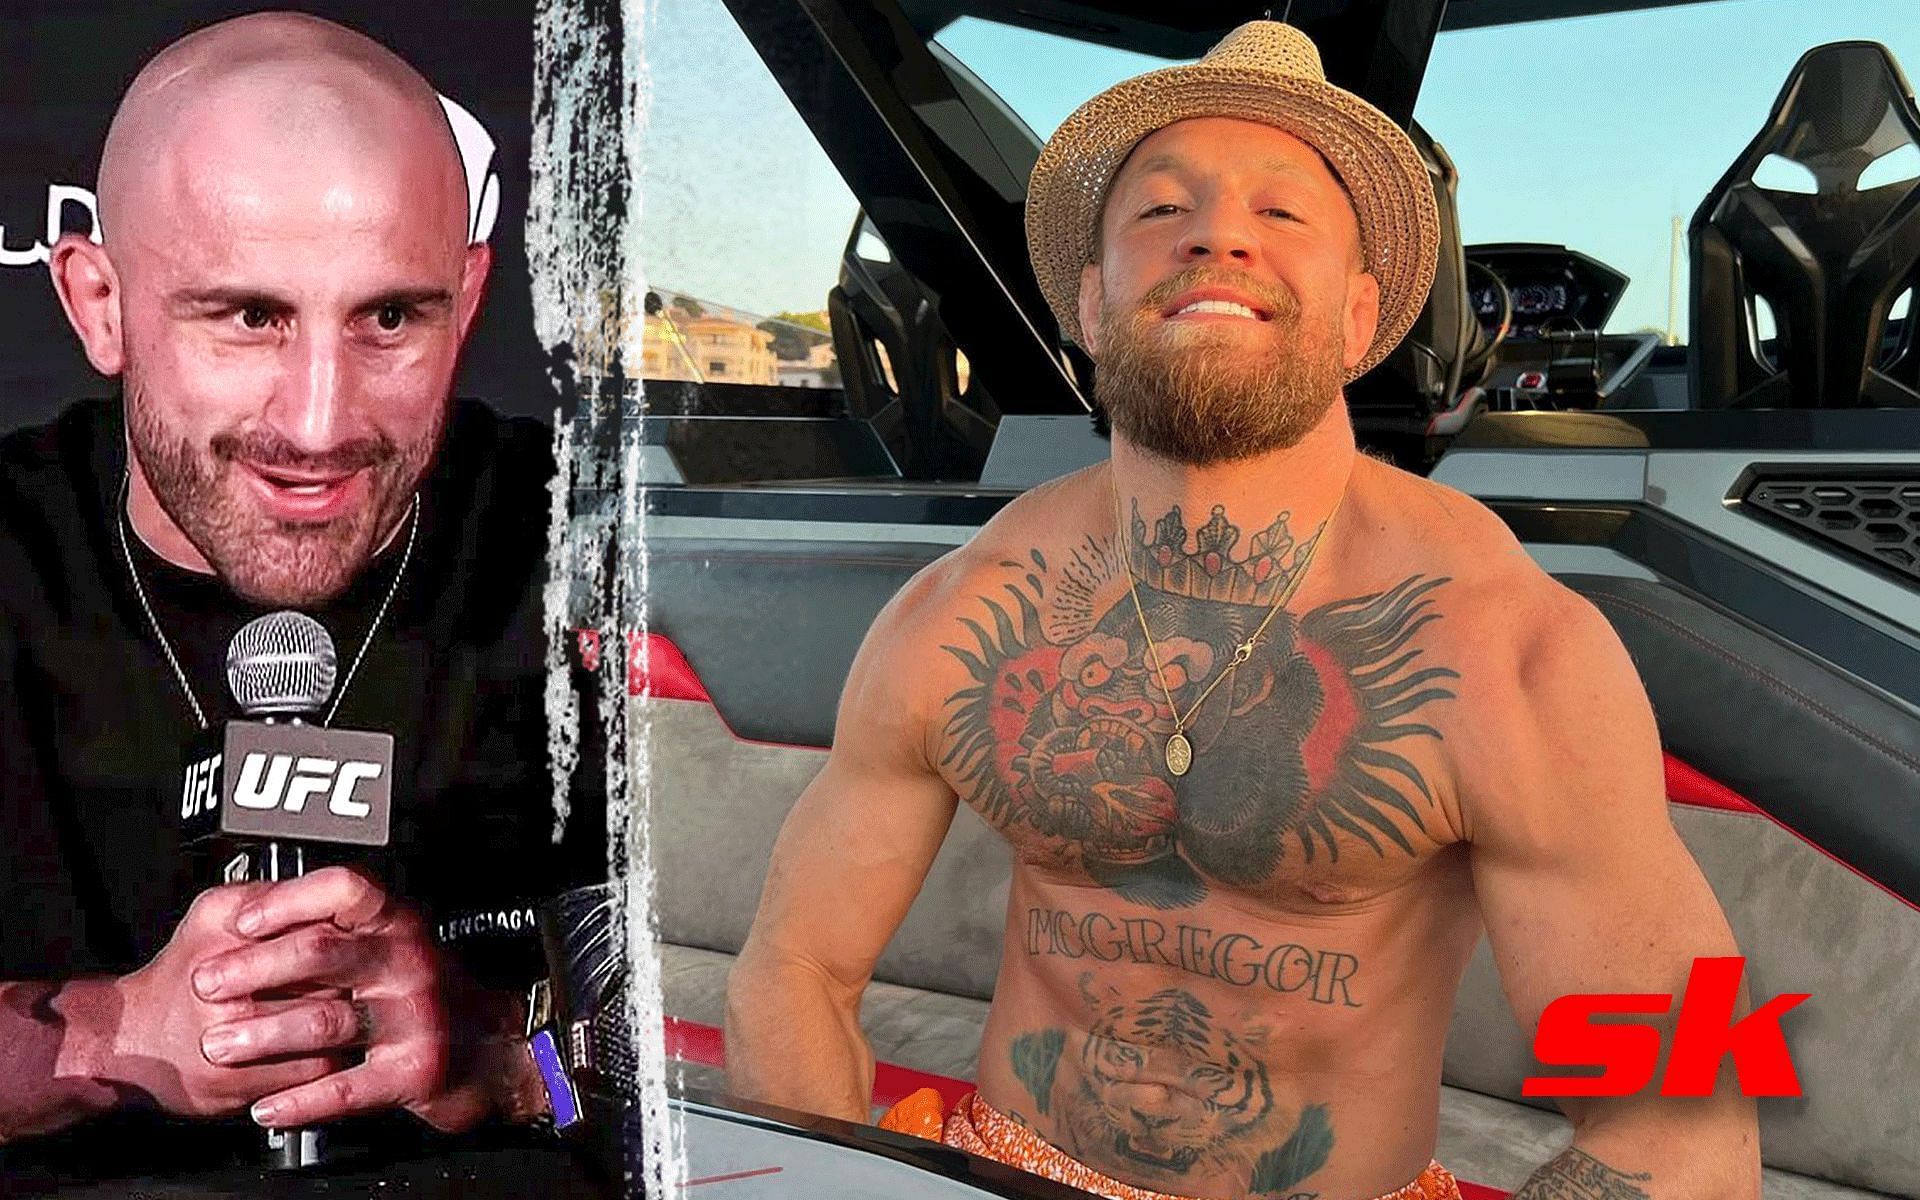 Alexander Volkanovski and Conor McGregor [Images via: UFC - Ultimate Fighting Championship on YouTube and @thenotoriousmma on Instagram]